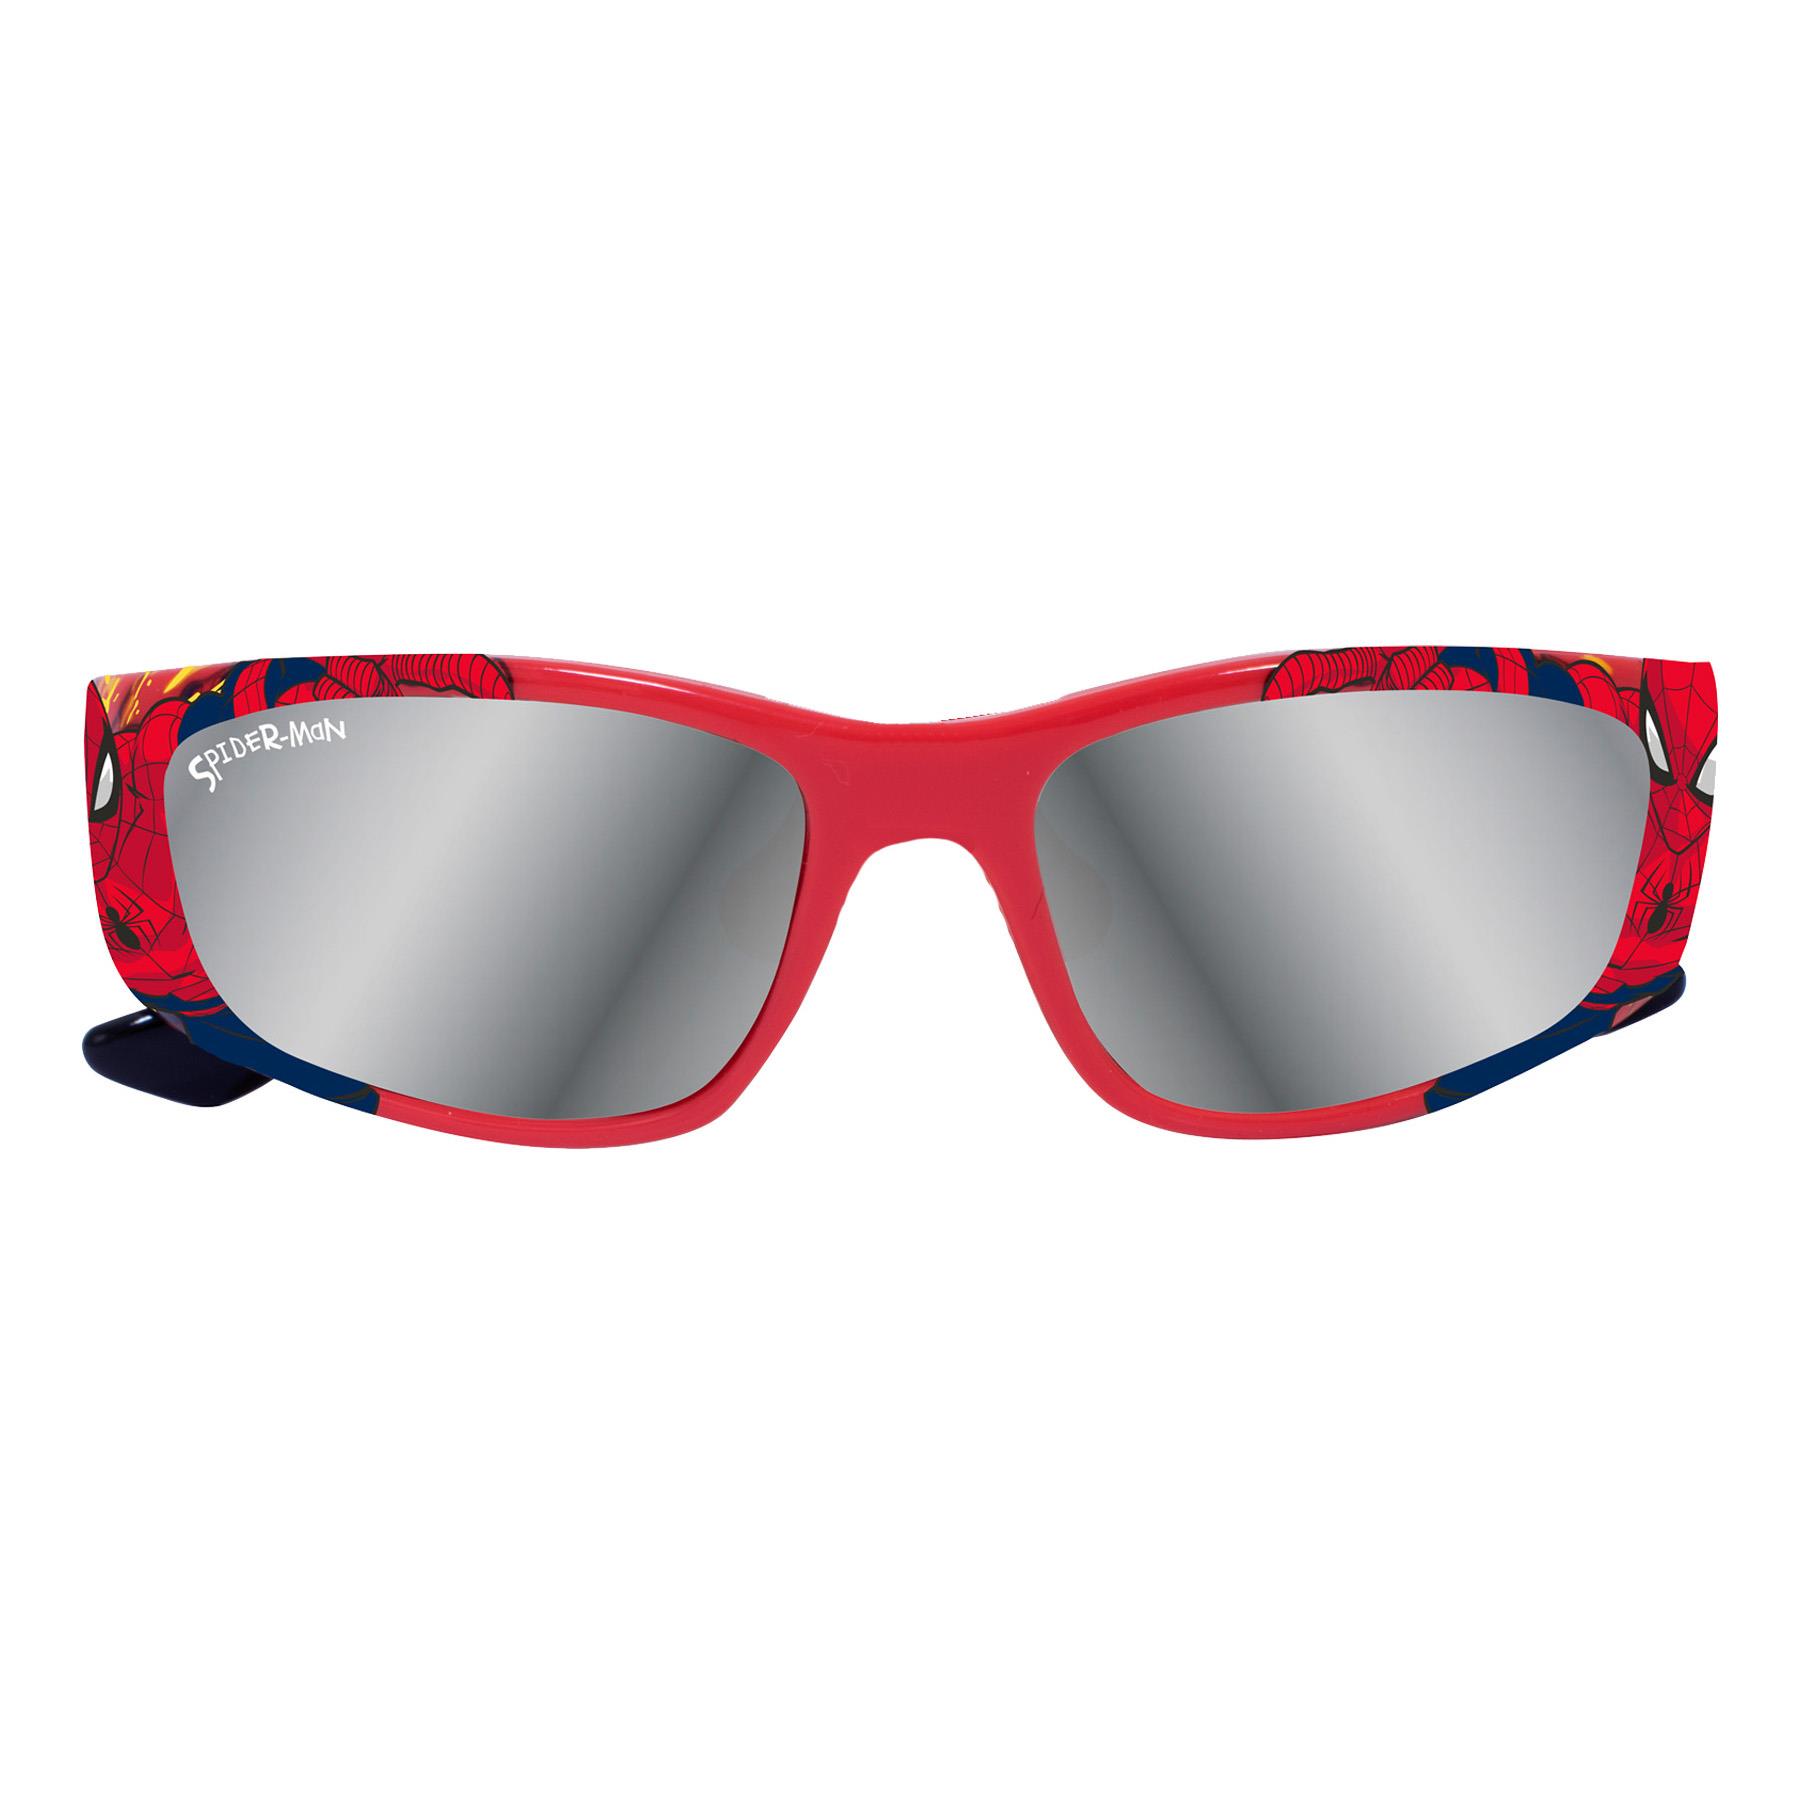 Superheroes Children's Sunglasses UV protection for Holiday - Marvel Spiderman SP24